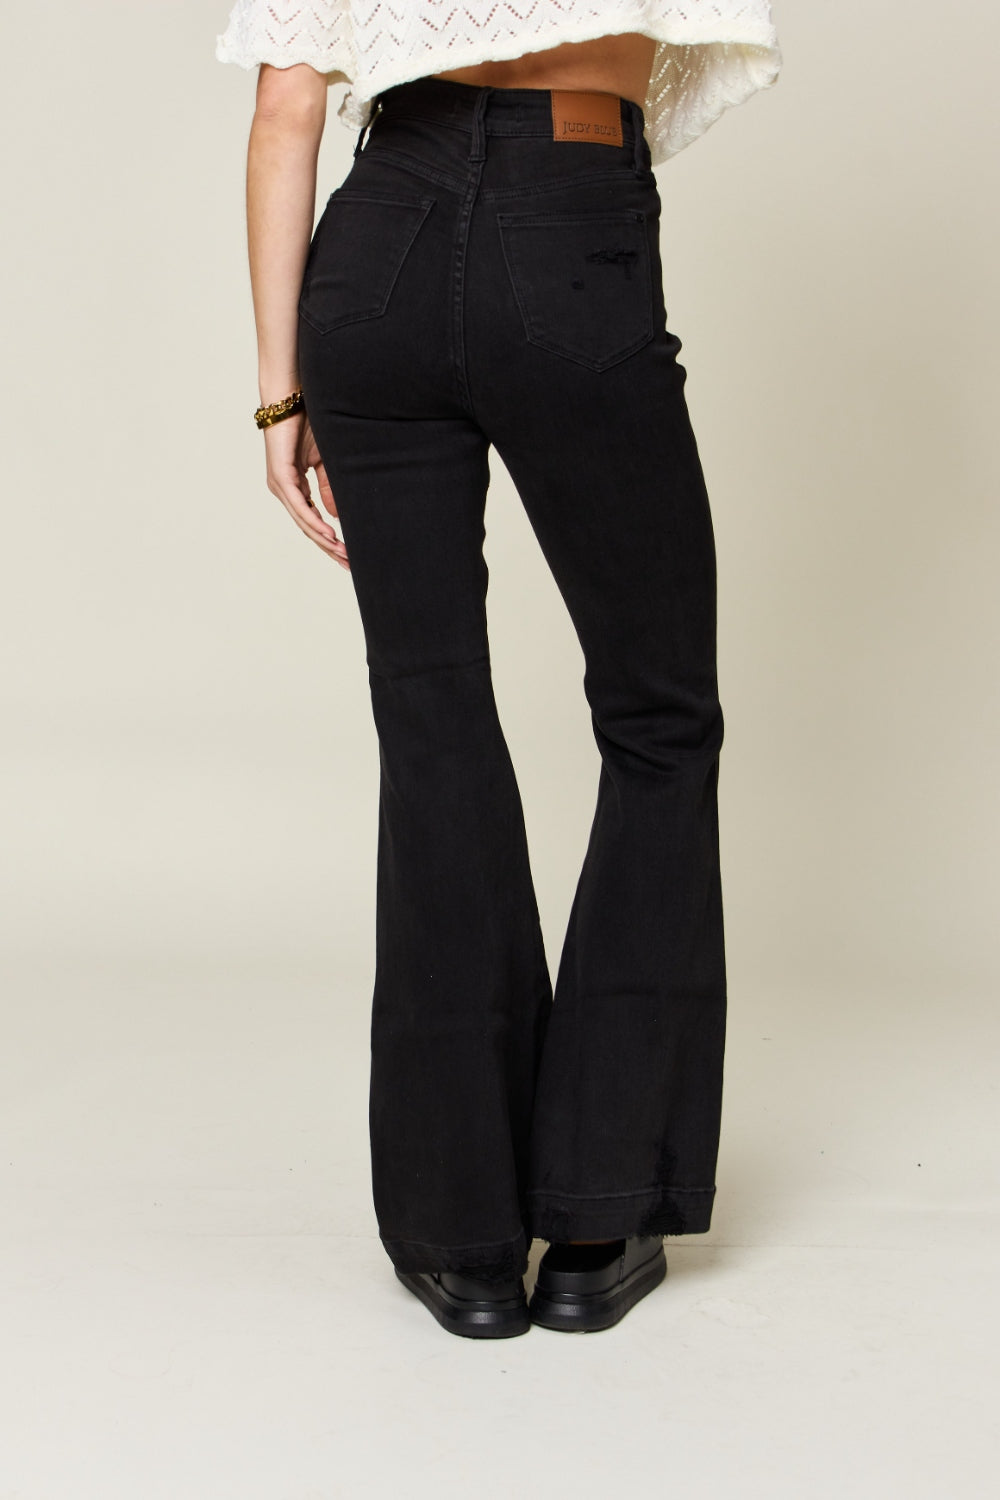 Judy Blue Black High Waist Distressed Flare Jeans-Trendsi-[option4]-[option5]-[option6]-[option7]-[option8]-Shop-Boutique-Clothing-for-Women-Online